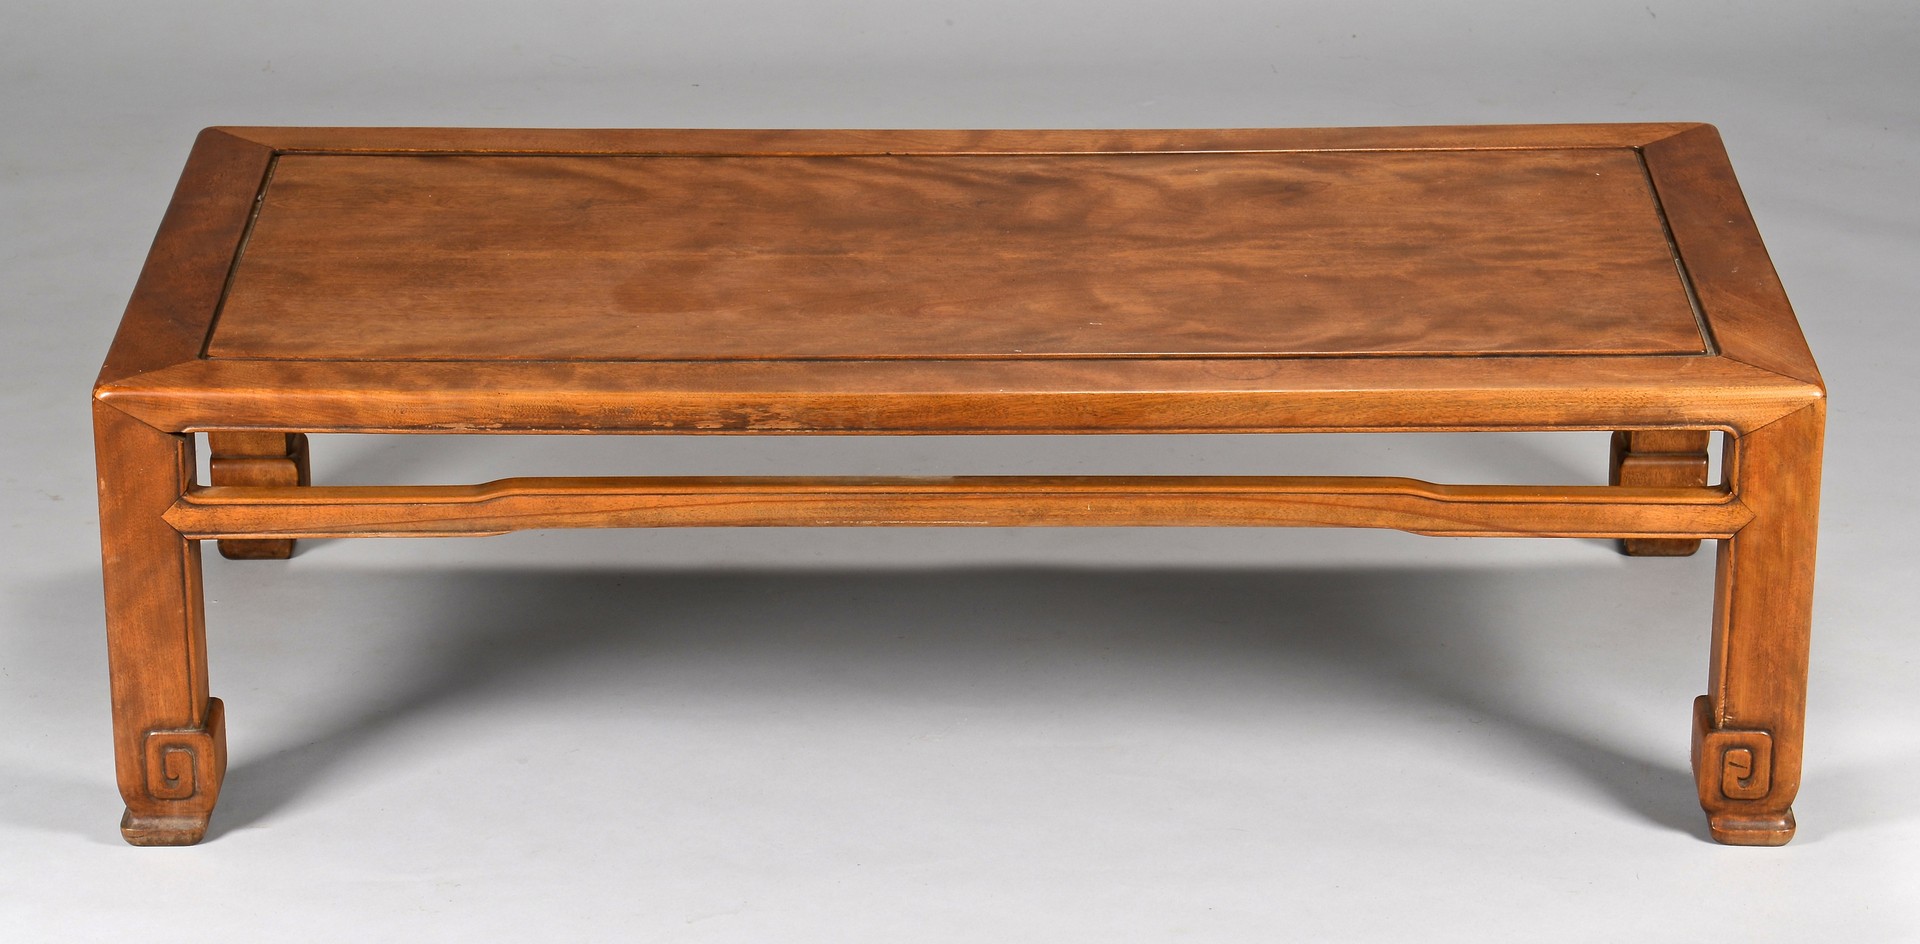 Lot 406: Chinese Hardwood Low Table